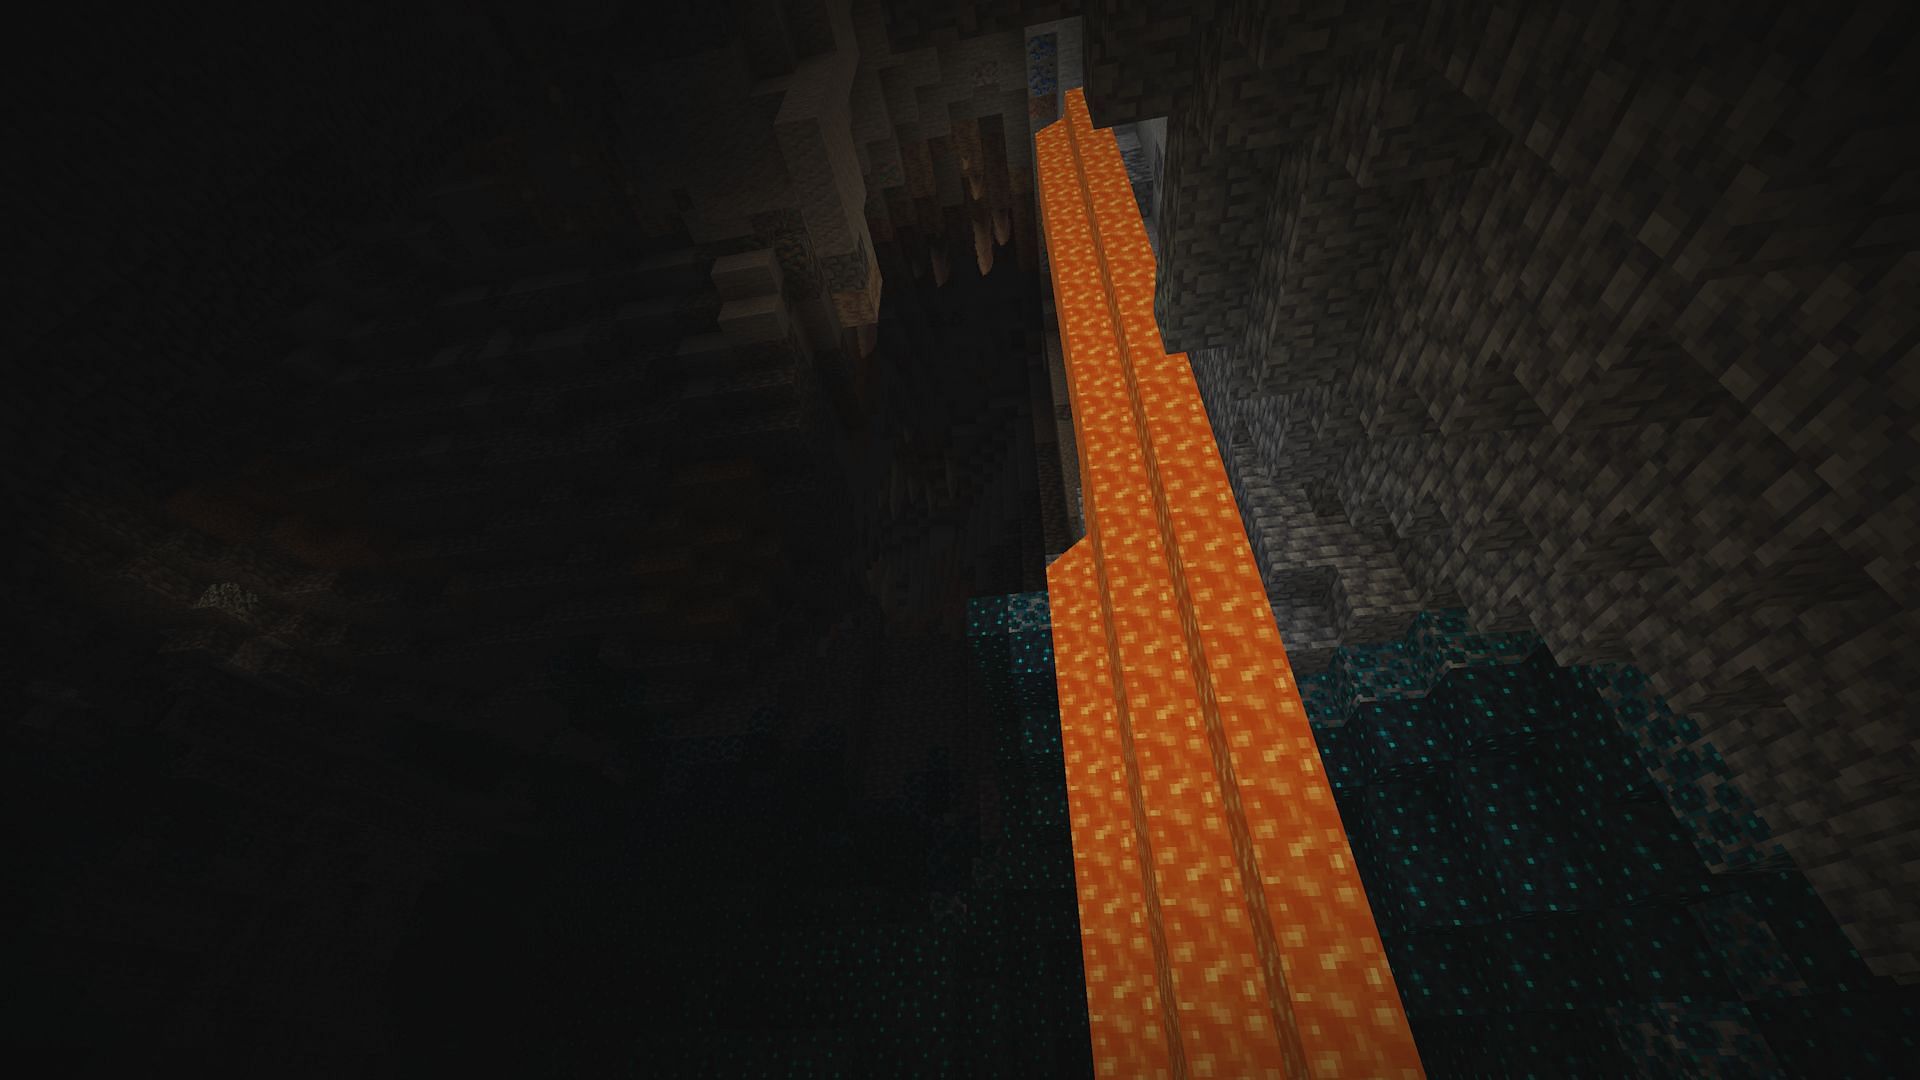 The dripstone caves found on this seed lead straight into an ancient city&#039;s deep dark biome (Image via Mojang)